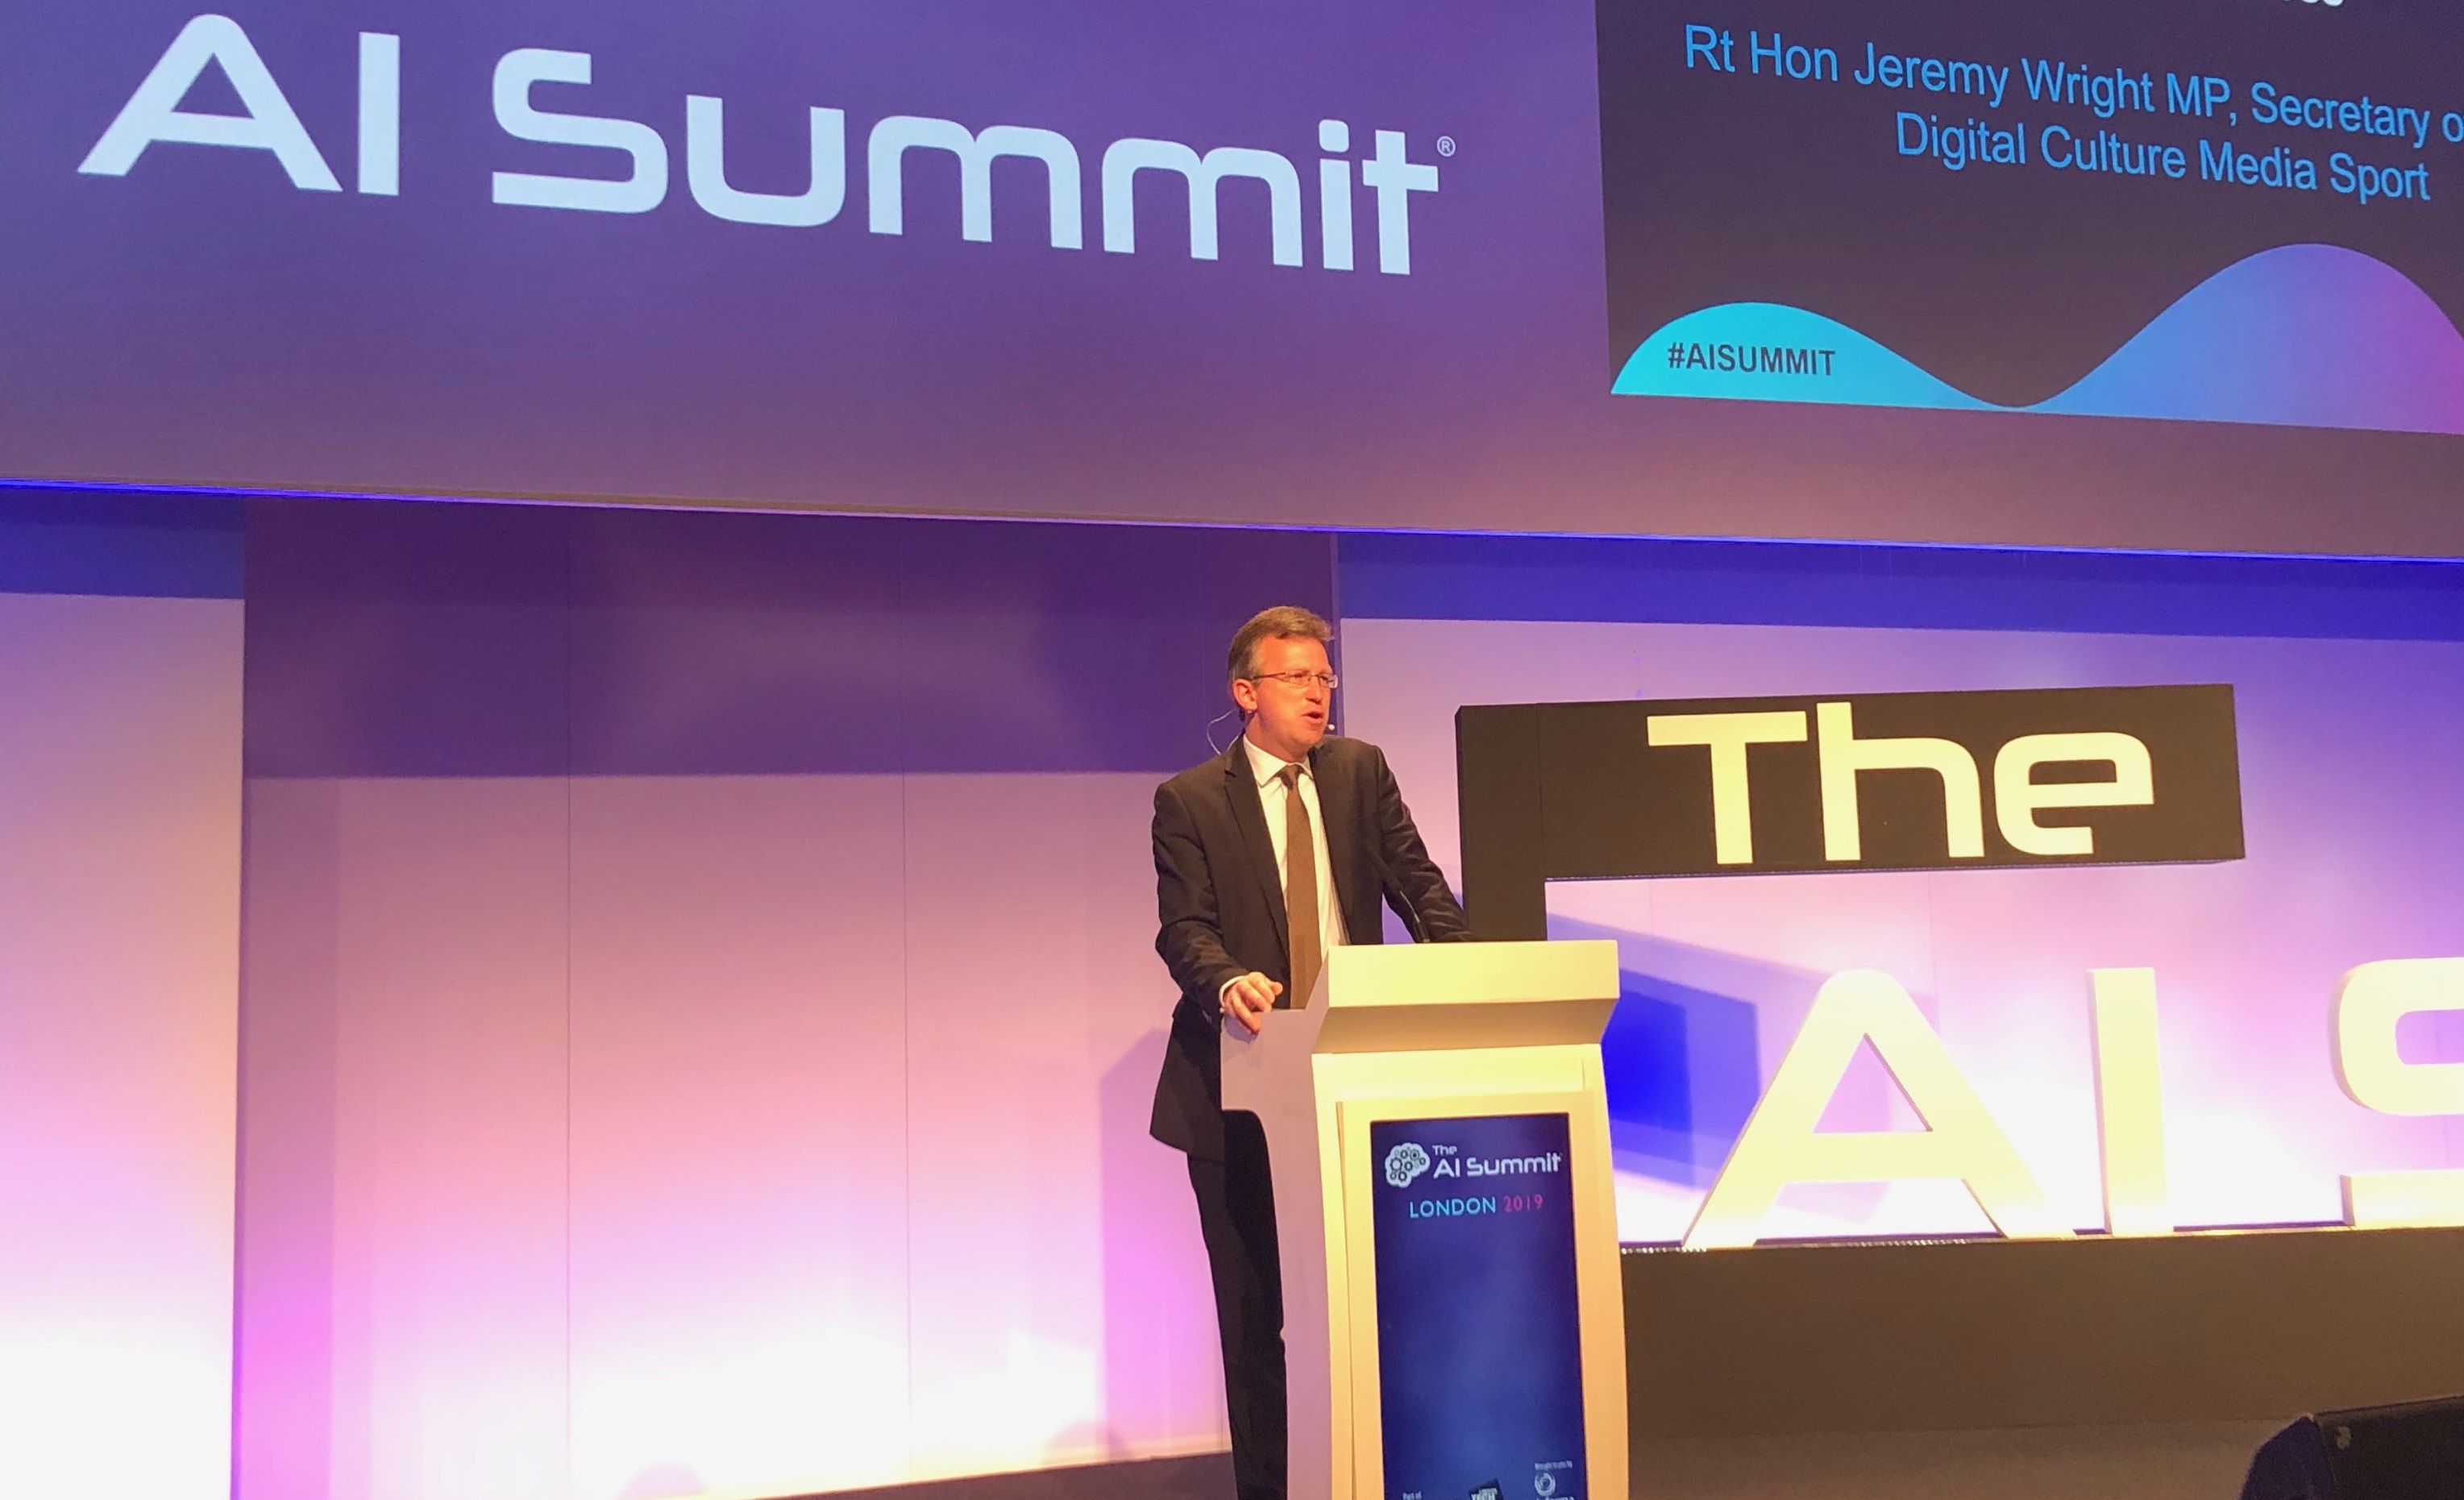 Jeremy Wright MP, the Secretary of State for Digital, Culture, Media and Sport, speaks at the AI Summit in London